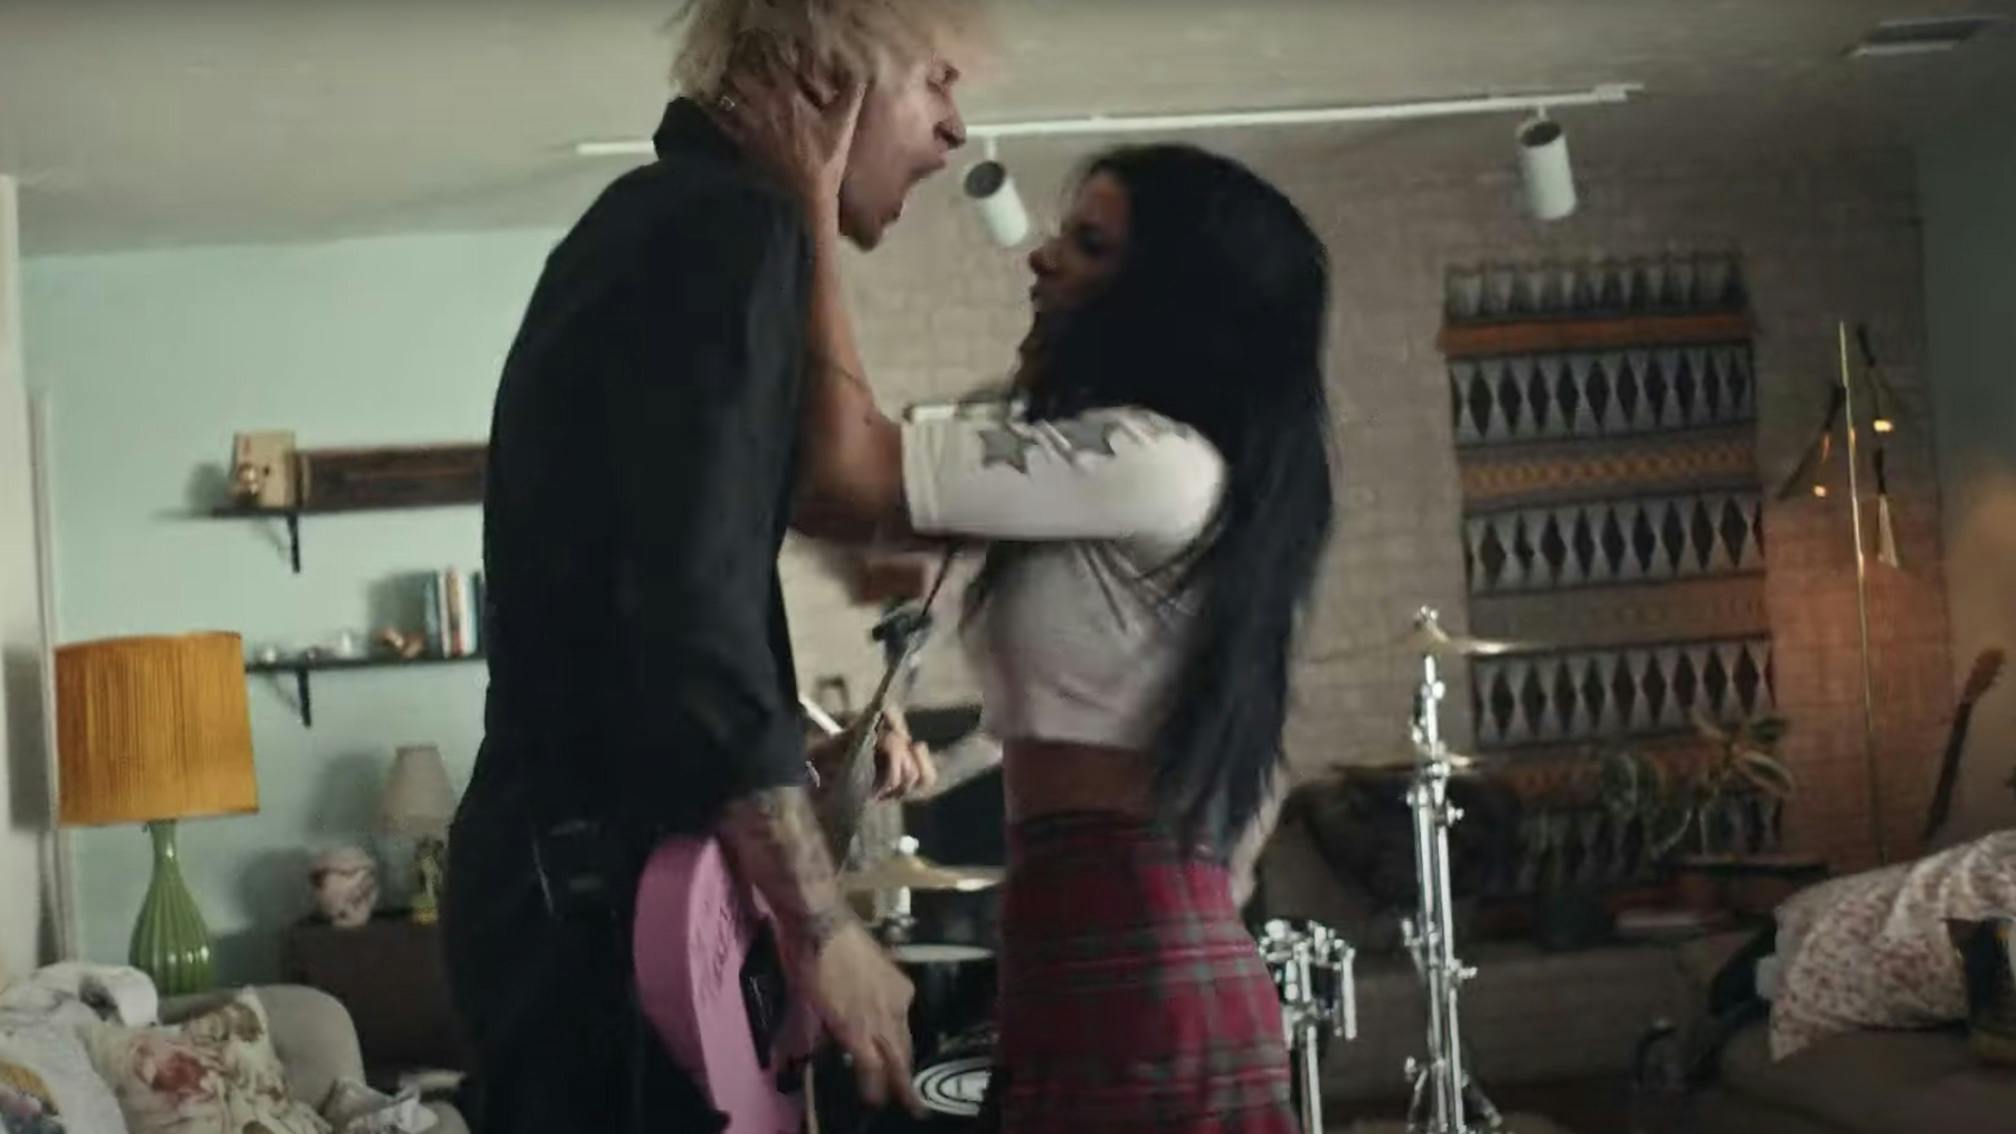 Watch The New Video For MGK And Halsey's Epic Pop-Punk Collab, Forget Me Too